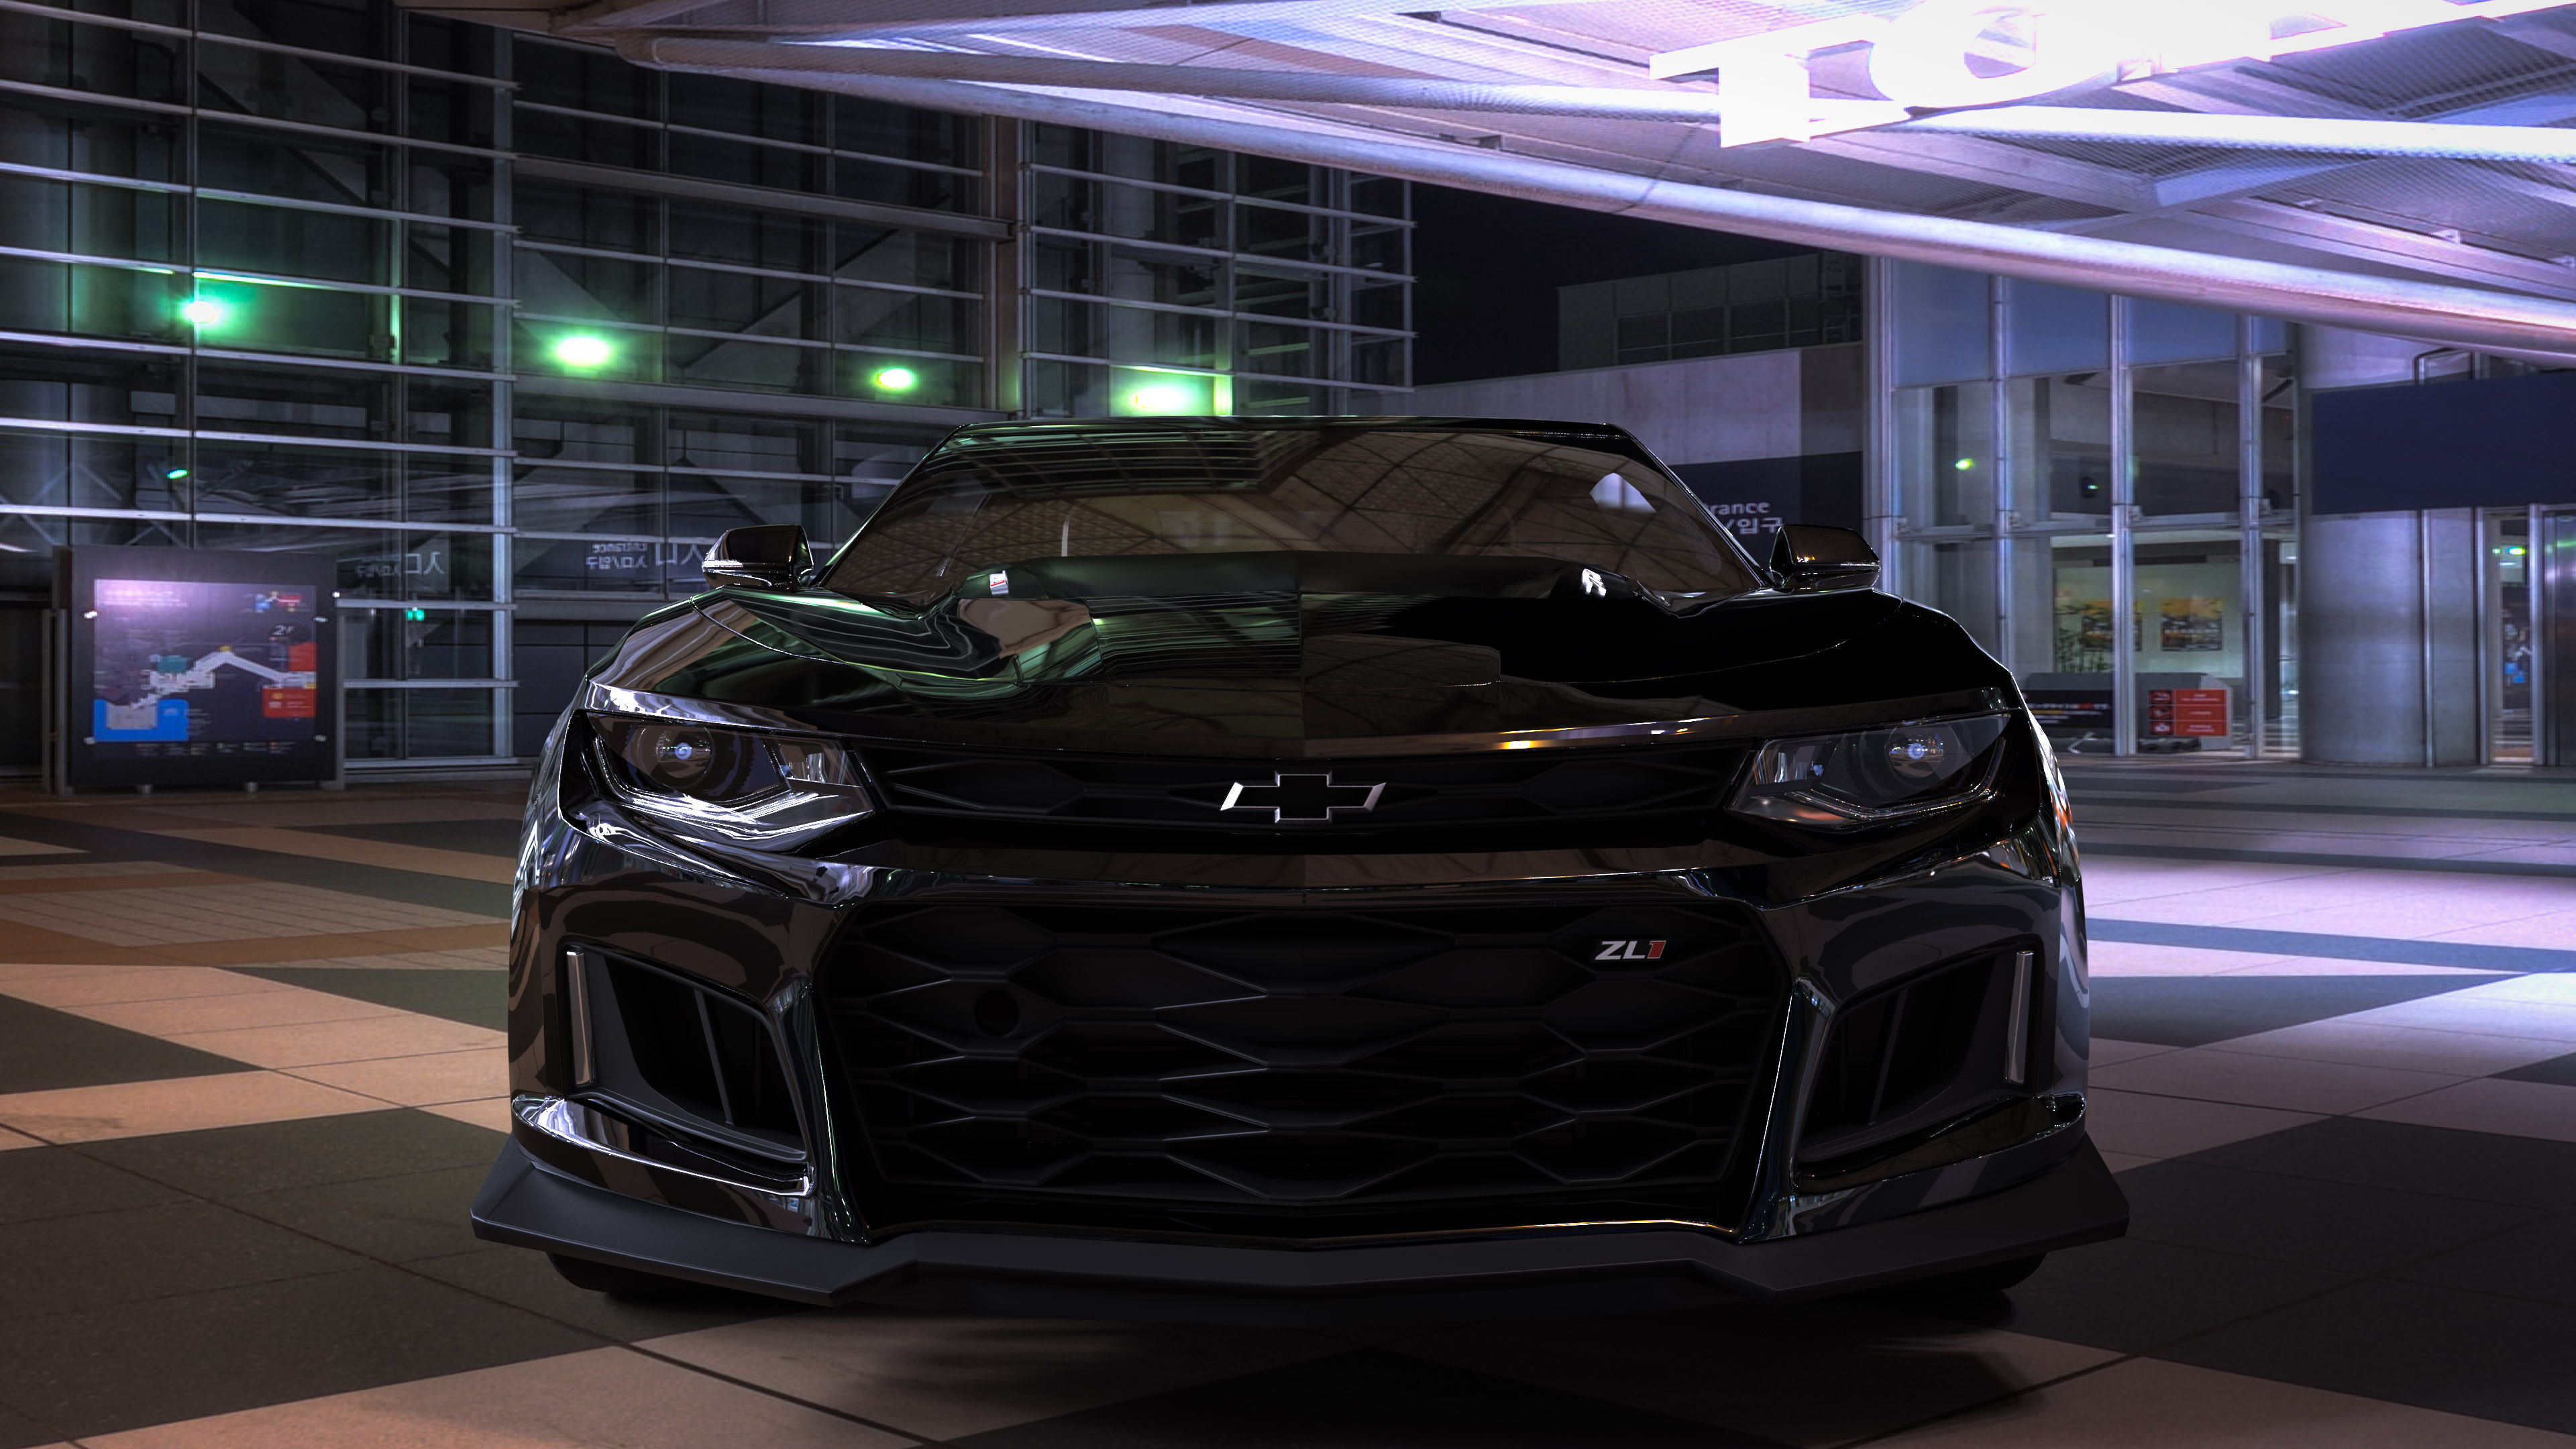 Feel the power of the Chevrolet Camaro with our muscle car wallpaper, capturing the essence of American automotive excellence.